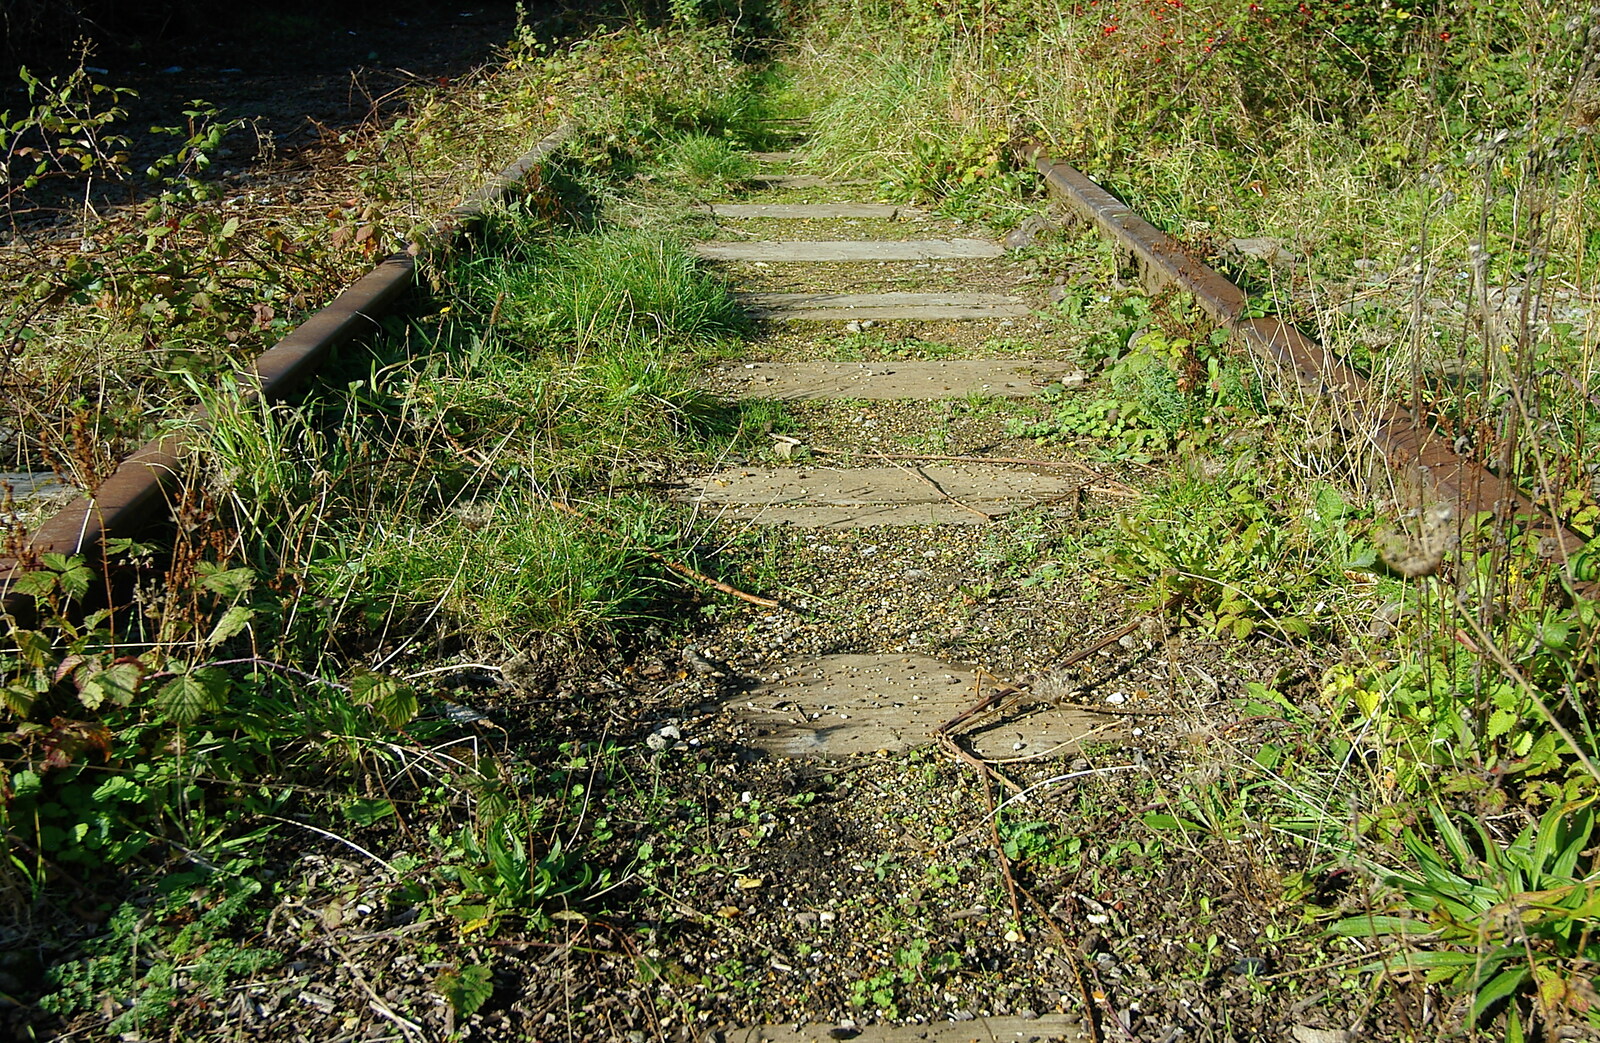 Abandoned tracks in the weeds from Disused Cambridge Railway, Milton Road, Cambridge - 28th October 2005